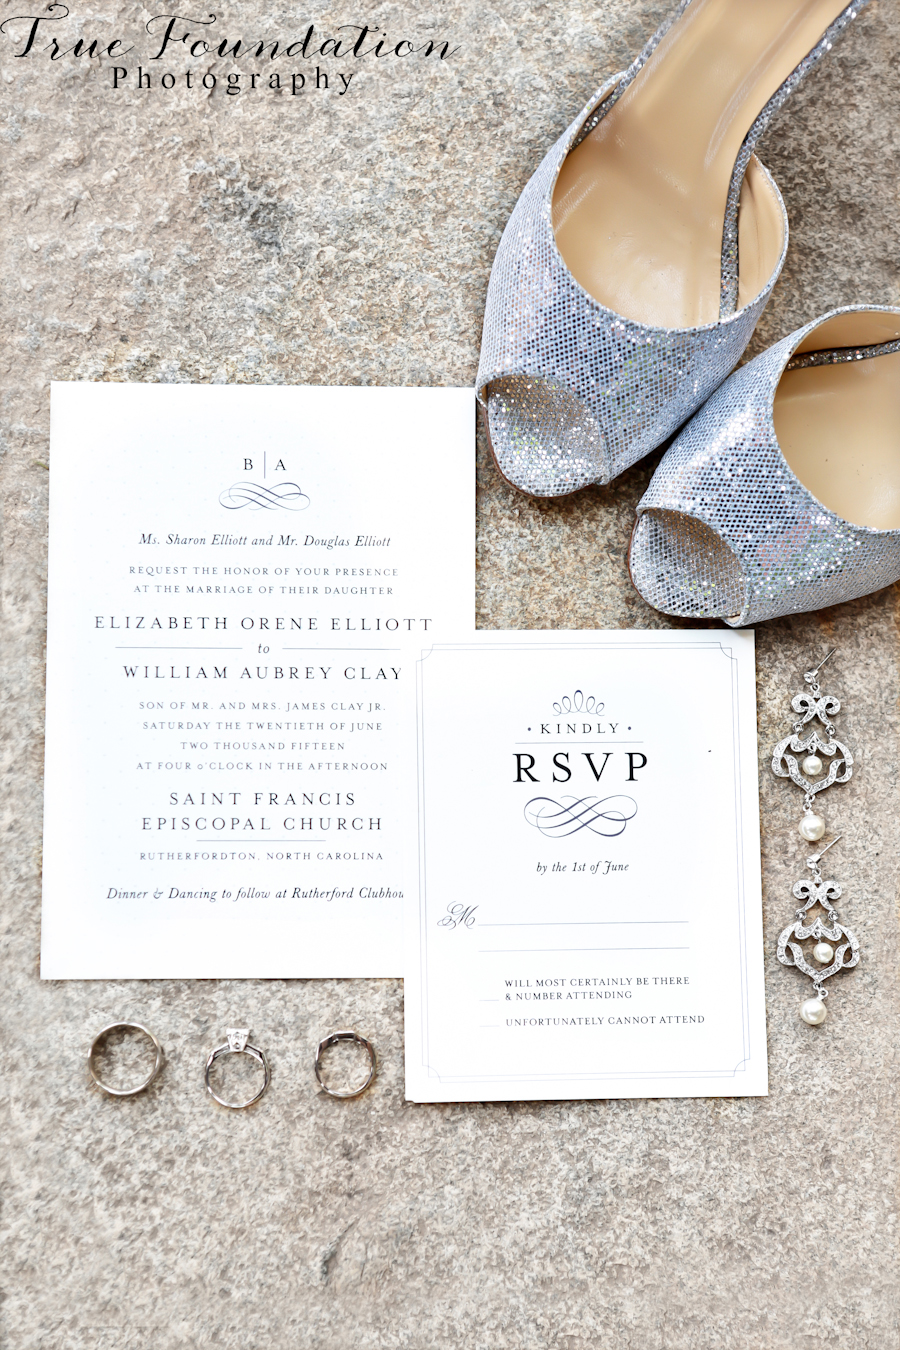 Hendersonville-North-Carolina-Wedding-Photography-Invitation-suite-Kate-Spade-Bride-Shoes-Bridal-Style-Rings-Stone-Church